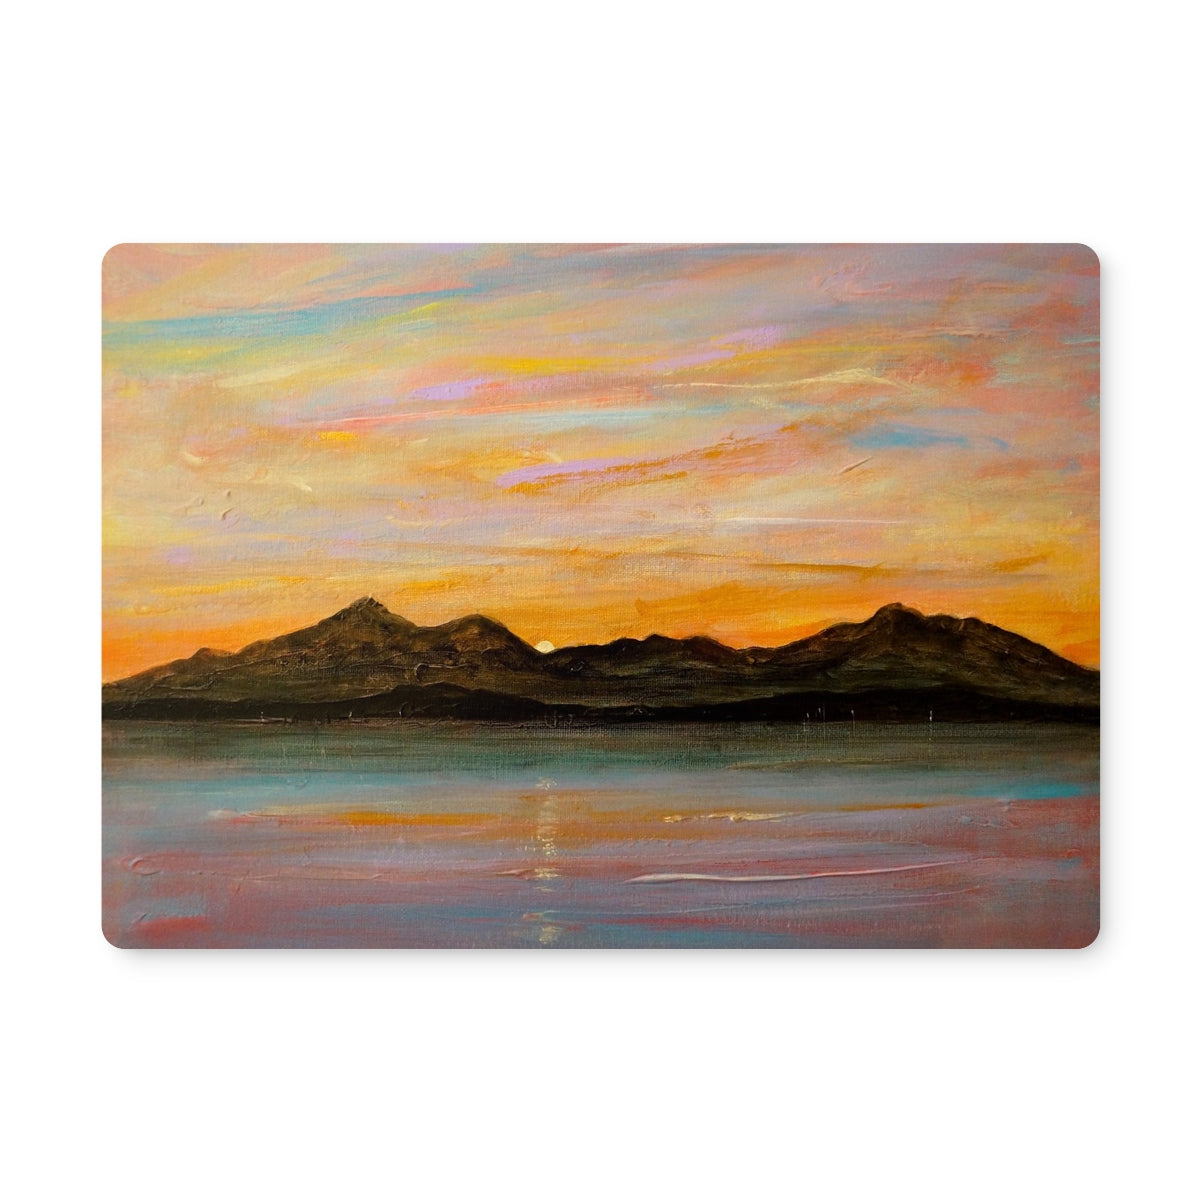 The Sleeping Warrior Arran Art Gifts Placemat-Placemats-Arran Art Gallery-Single Placemat-Paintings, Prints, Homeware, Art Gifts From Scotland By Scottish Artist Kevin Hunter